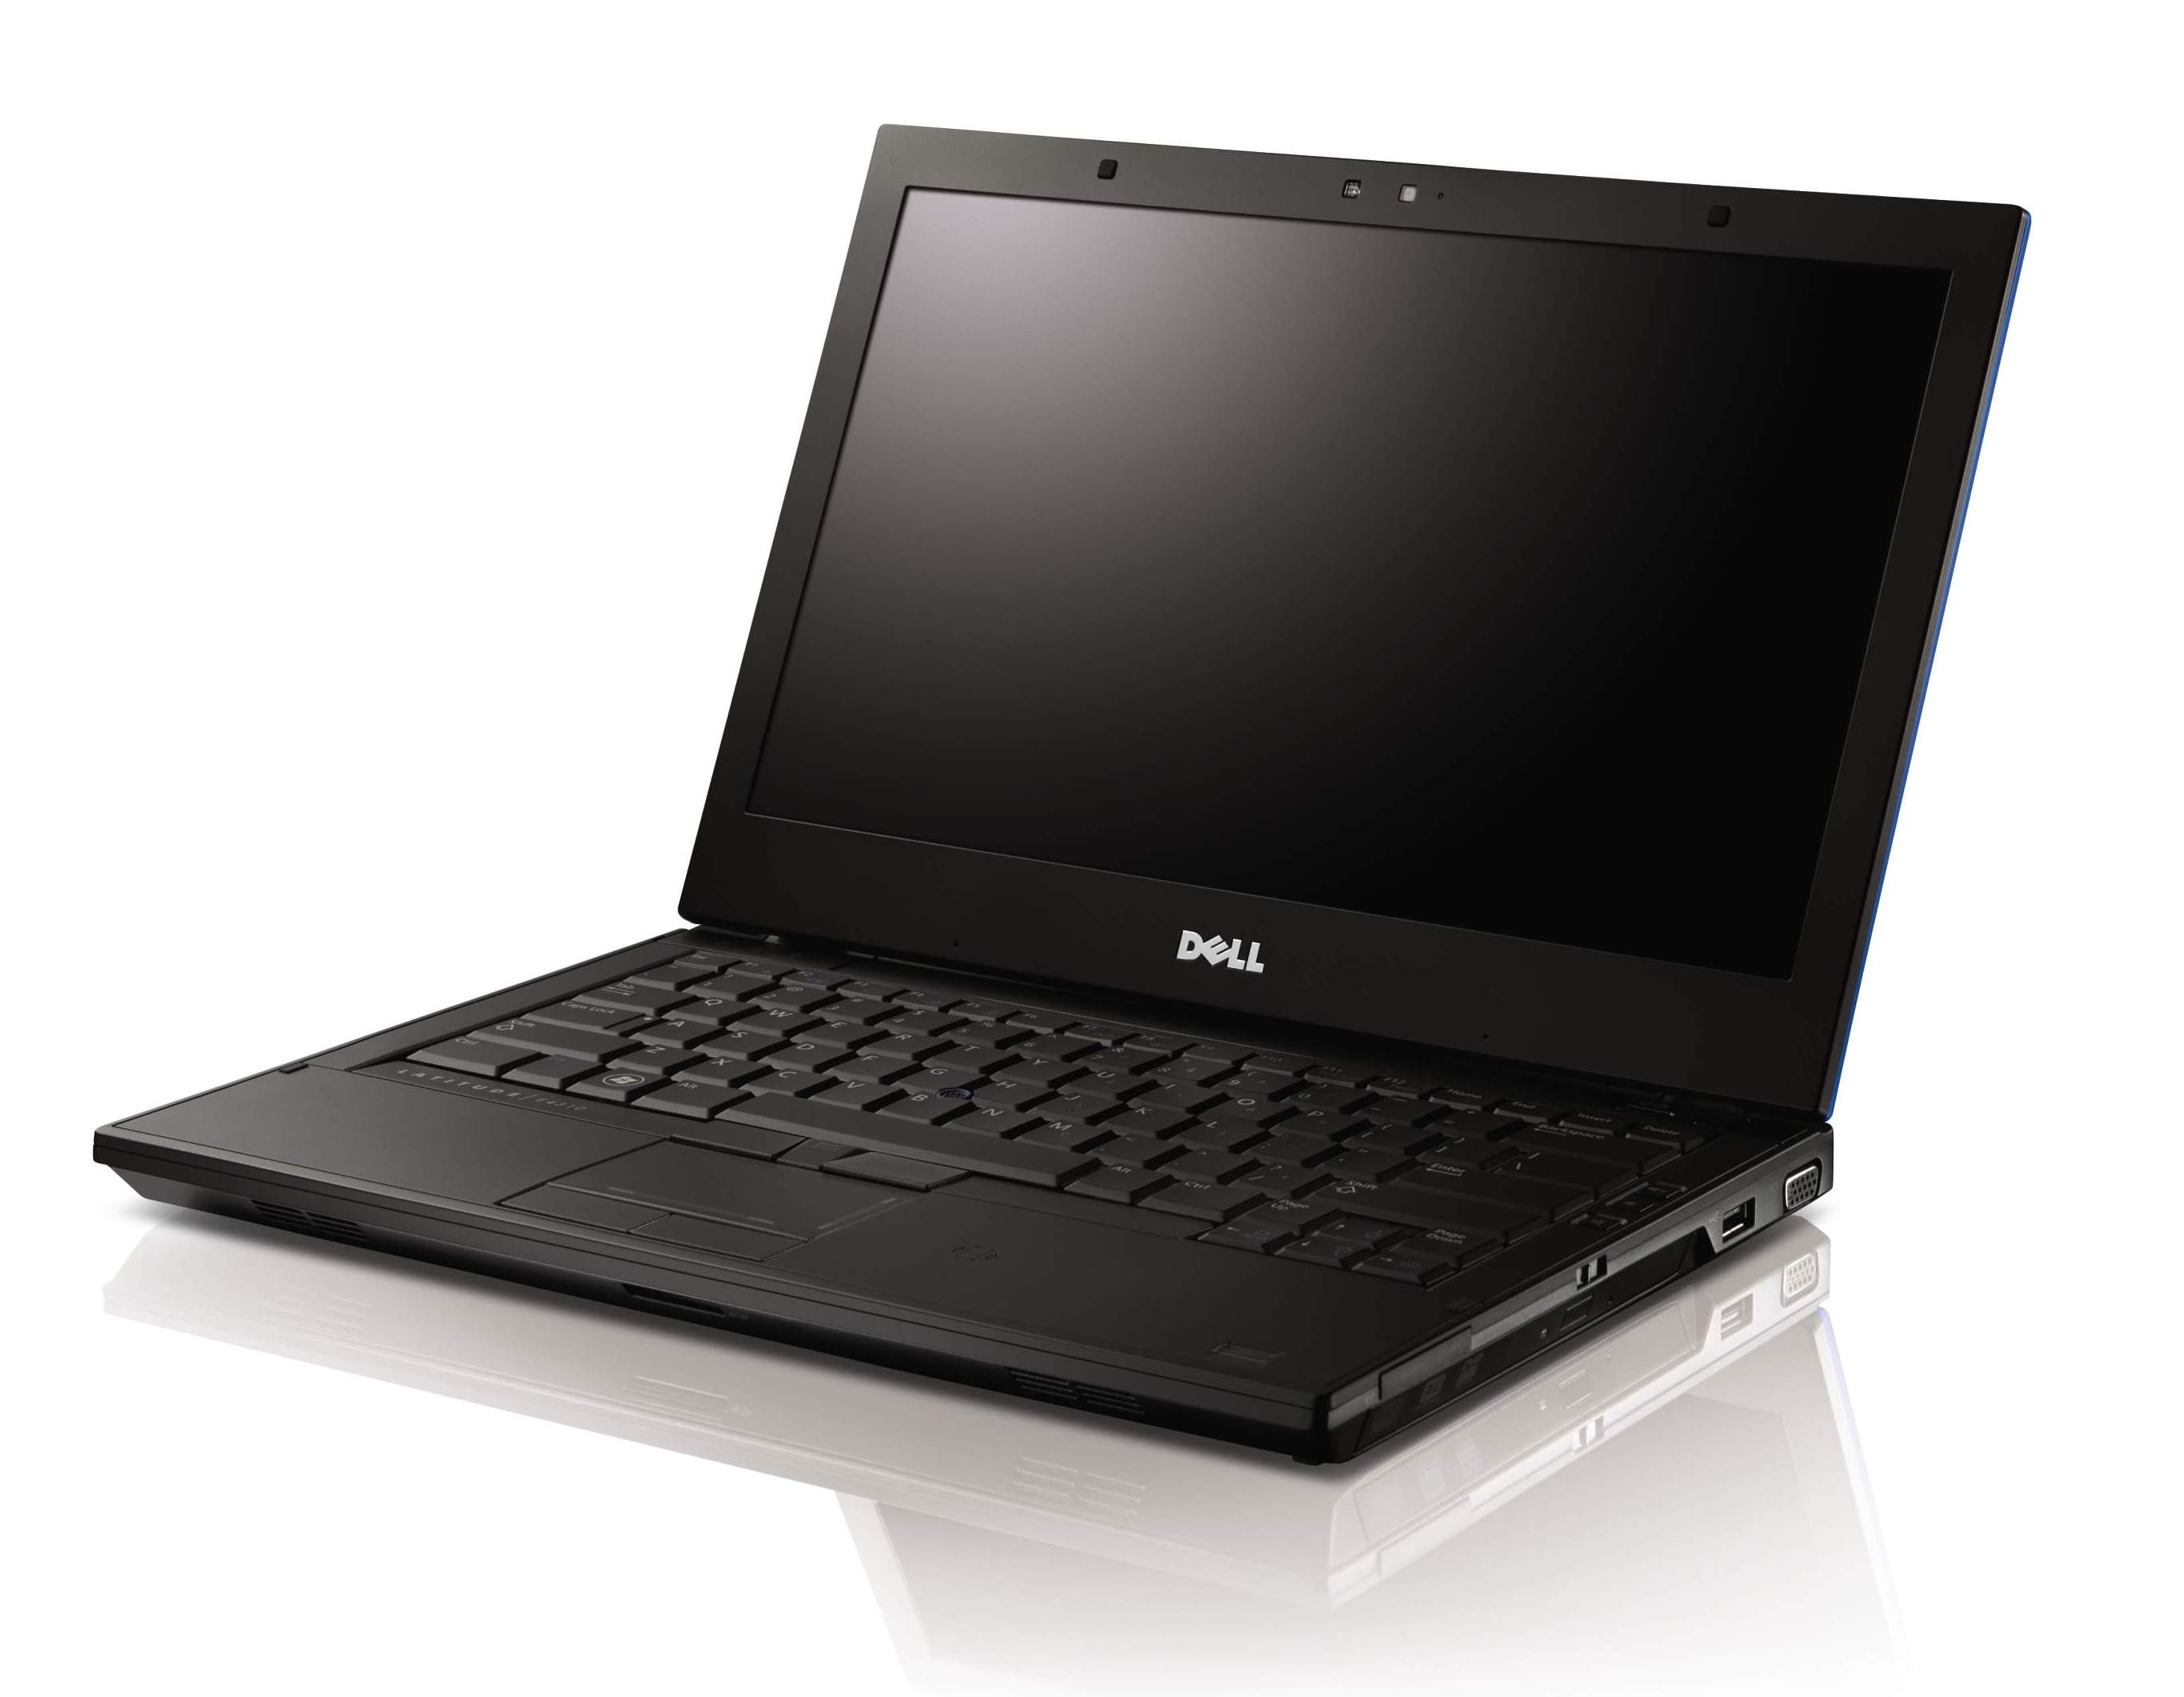 dell inspiron 15 5000 drivers for windows 8.1 64 bit